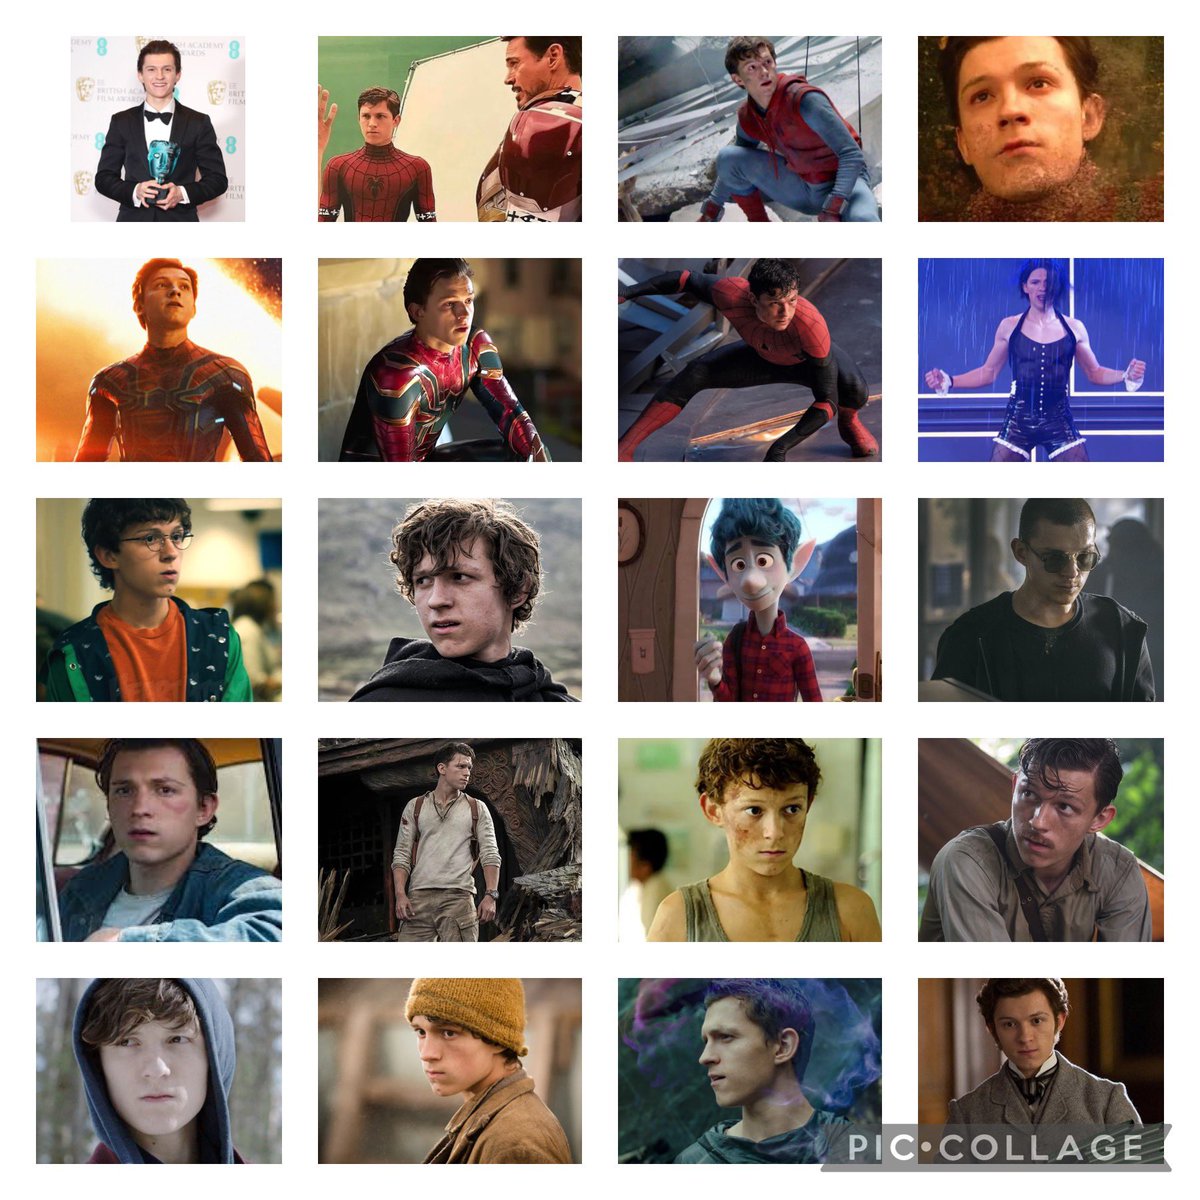 Happy birthday to Tom Holland 😍🥳 #spidermanhomecoming #spidermanfarfromhome #spidermannowayhome #captainamericacivilwar #avengersinfinitywar #avengersendgame #thedevilallthetime #cherry #theimpossible #uncharted #chaoswalking #onward #howilivenow #pilgrimage #thelostcityofz